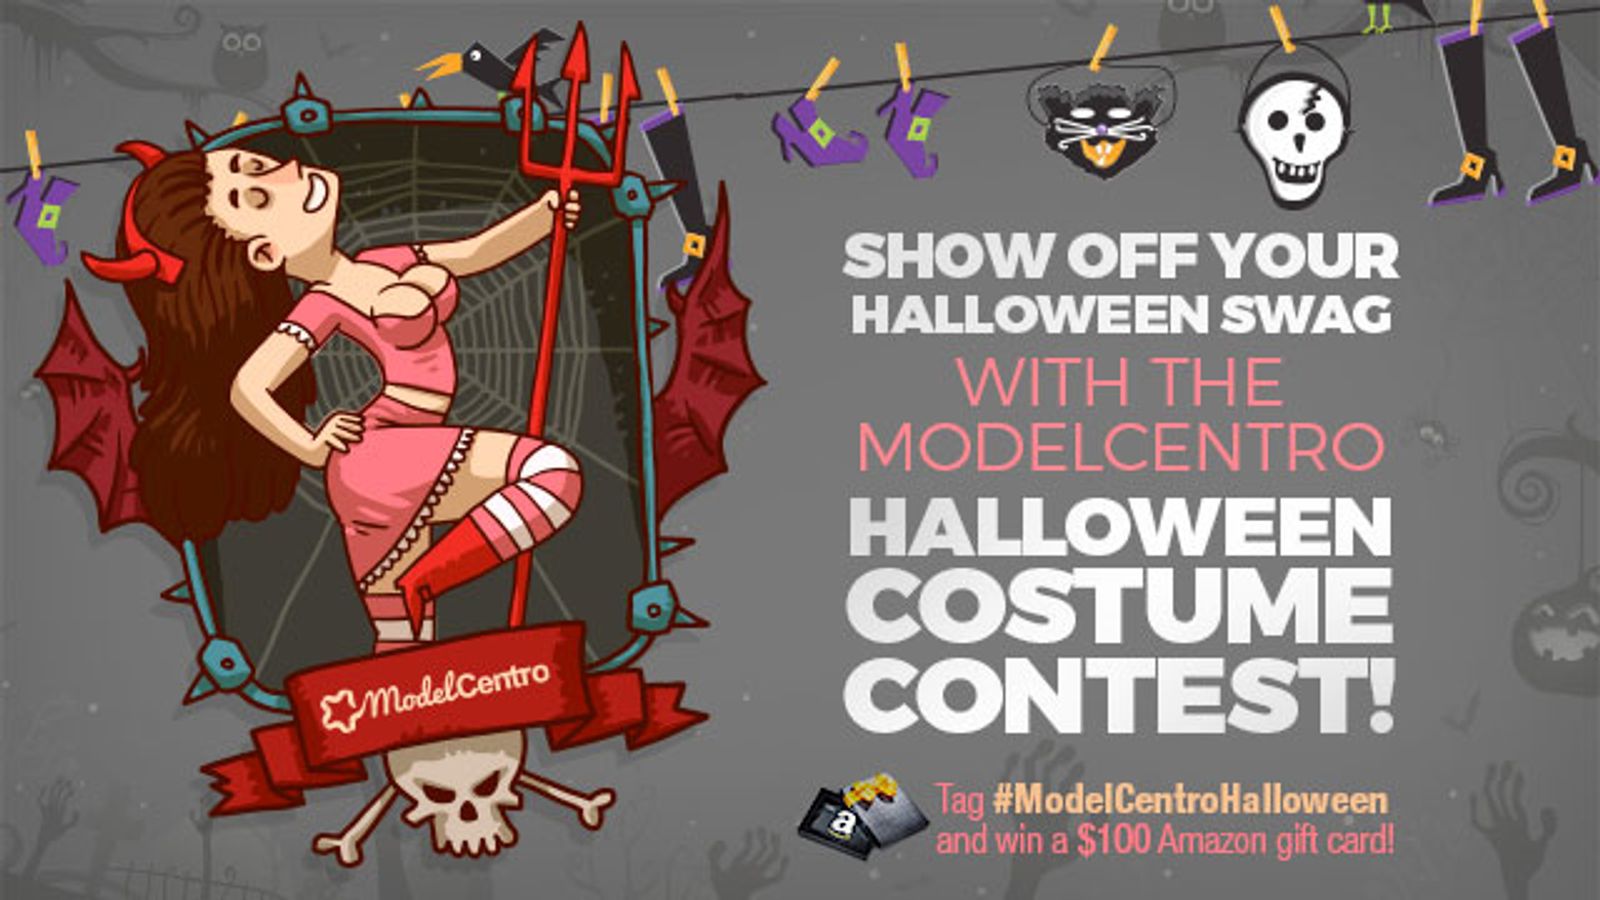 ModelCentro Hosts 2nd Annual Halloween Costume Contest